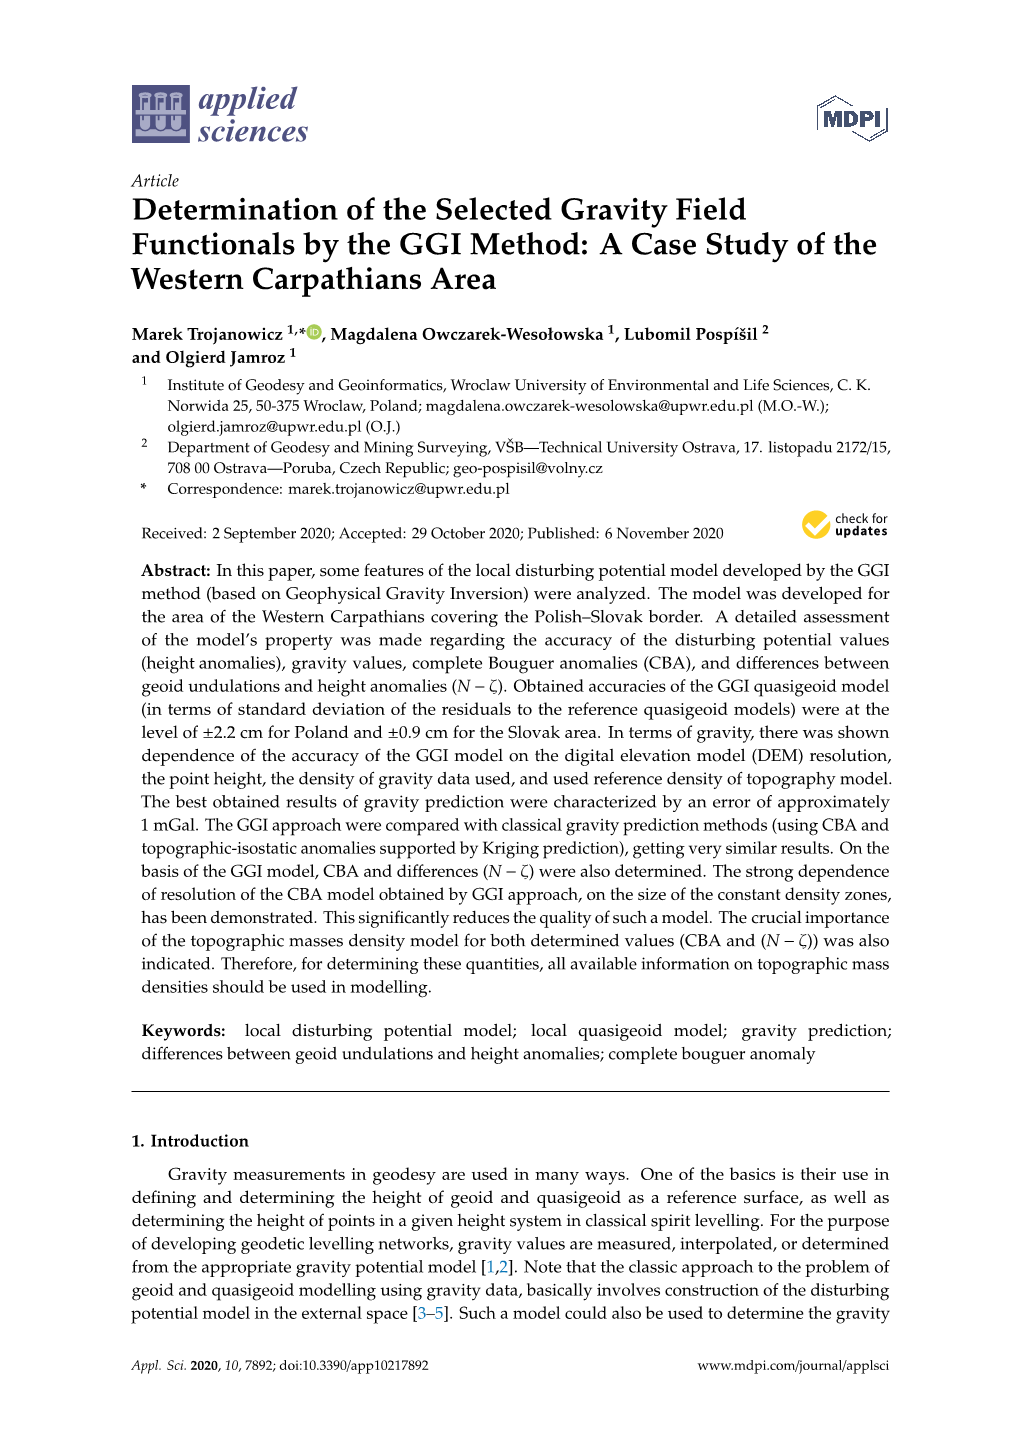 Determination of the Selected Gravity Field Functionals by the GGI Method: a Case Study of the Western Carpathians Area